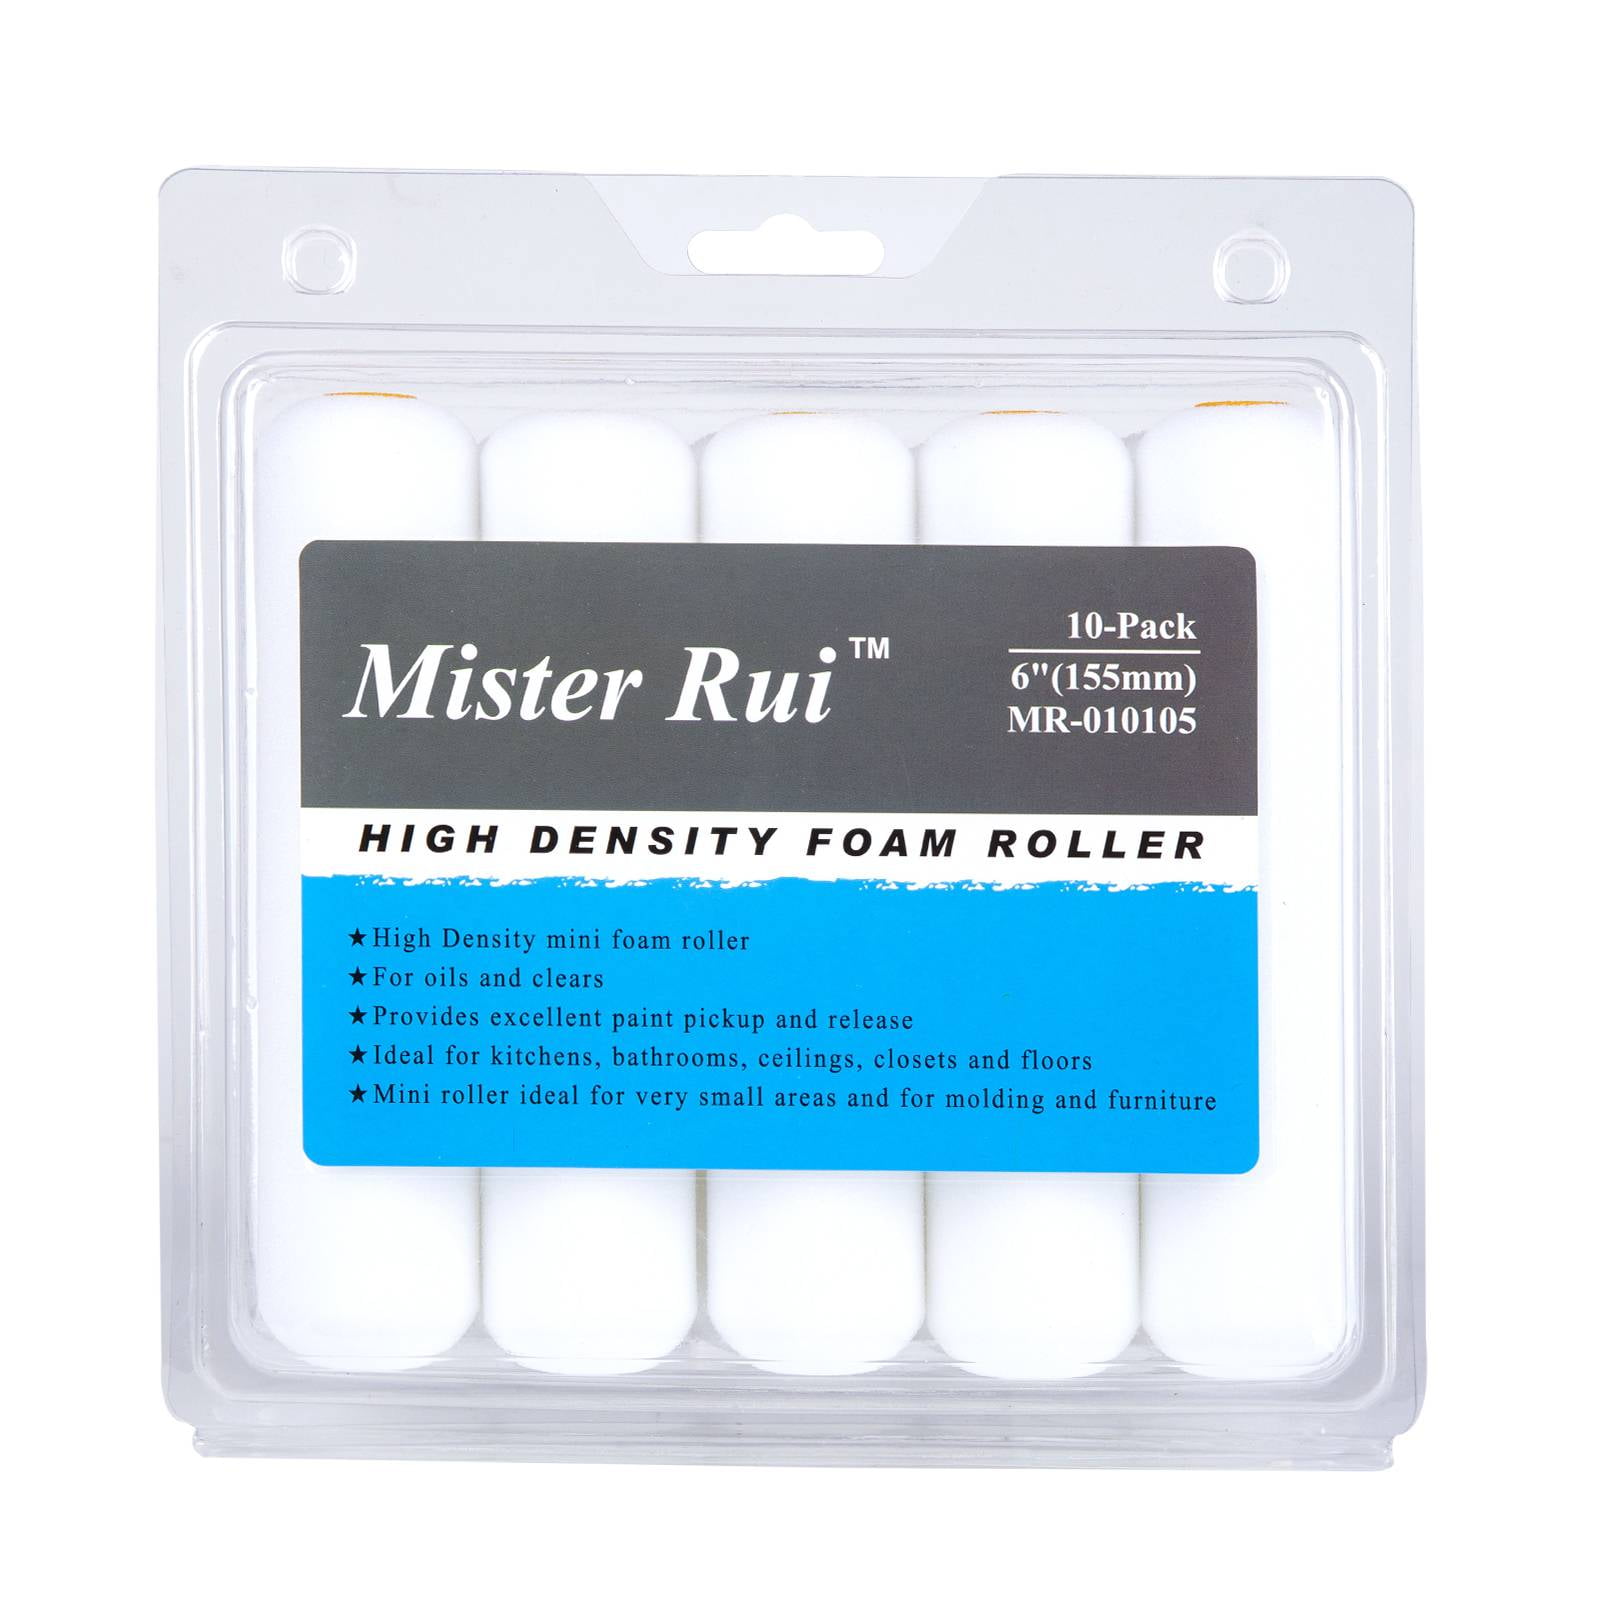 Mister Rui Foam Paint Roller, 4 inch Paint Roller 8 Pack, Small Paint  Roller, High Density Foam Paint Roller Tray and Liner Set, Sponge Rollers  for